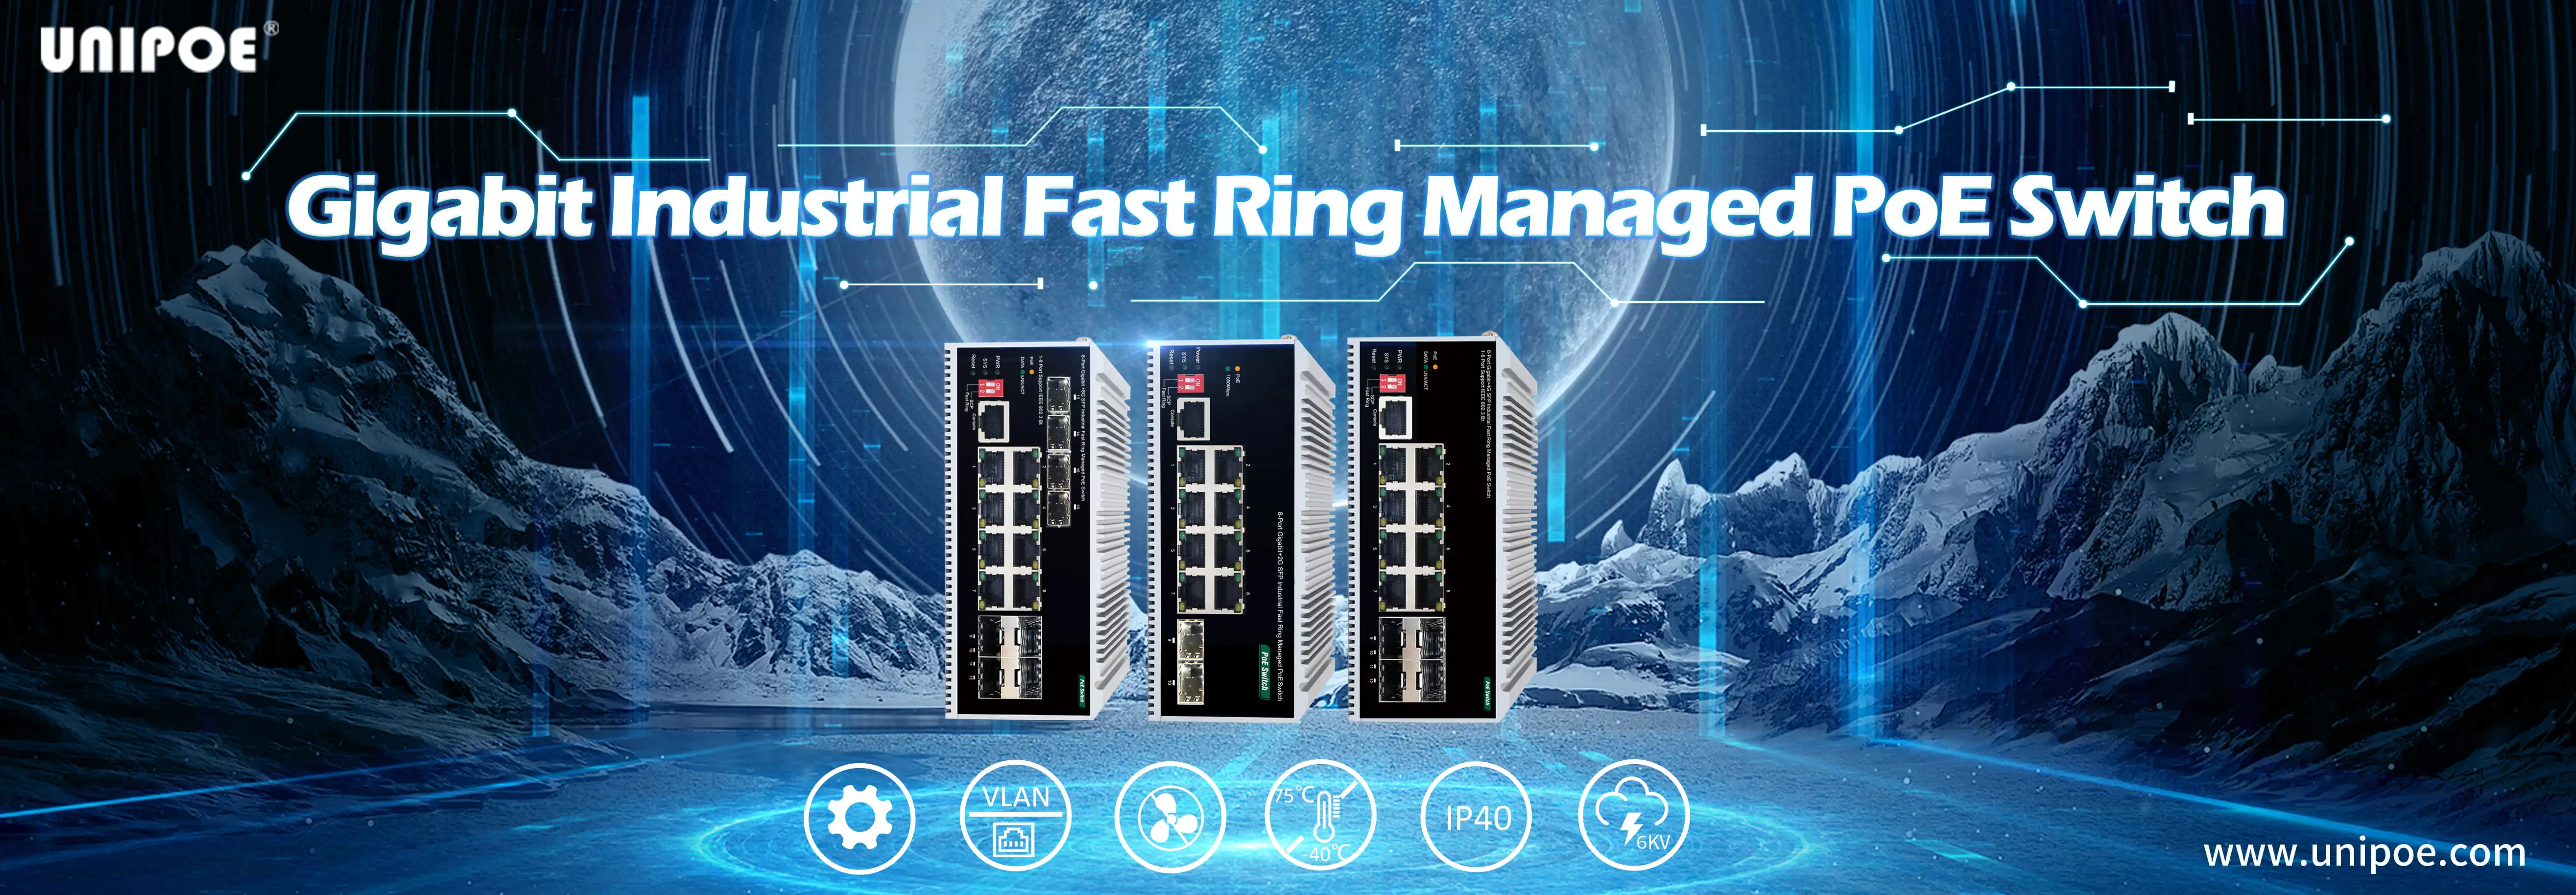 Gigabit Industrial Fast Ring Managed PoE Switch